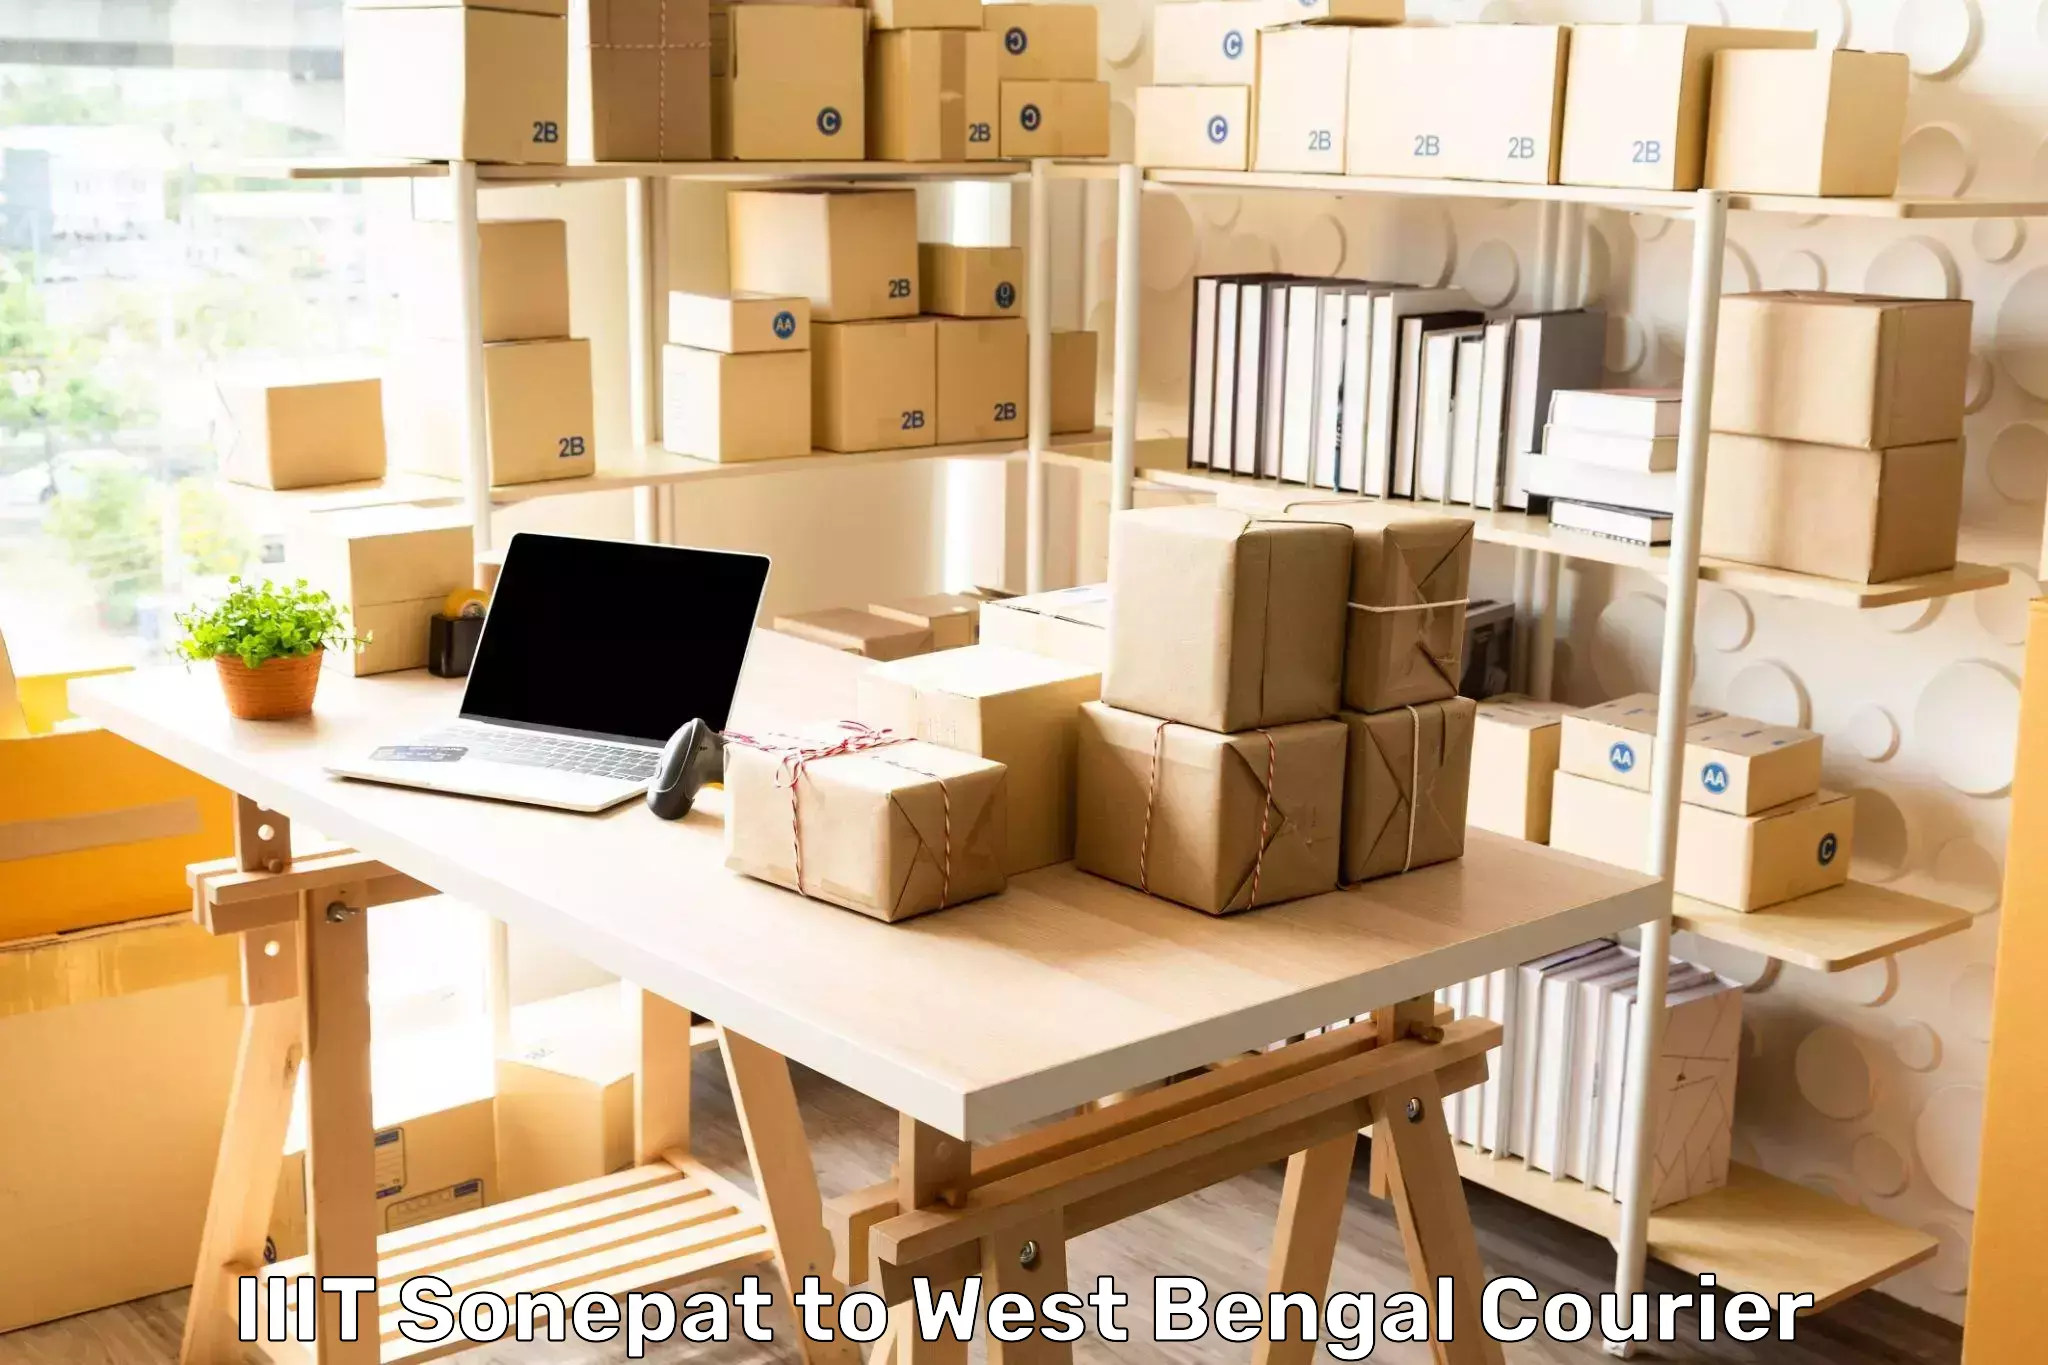 Reliable courier service IIIT Sonepat to Barrackpore